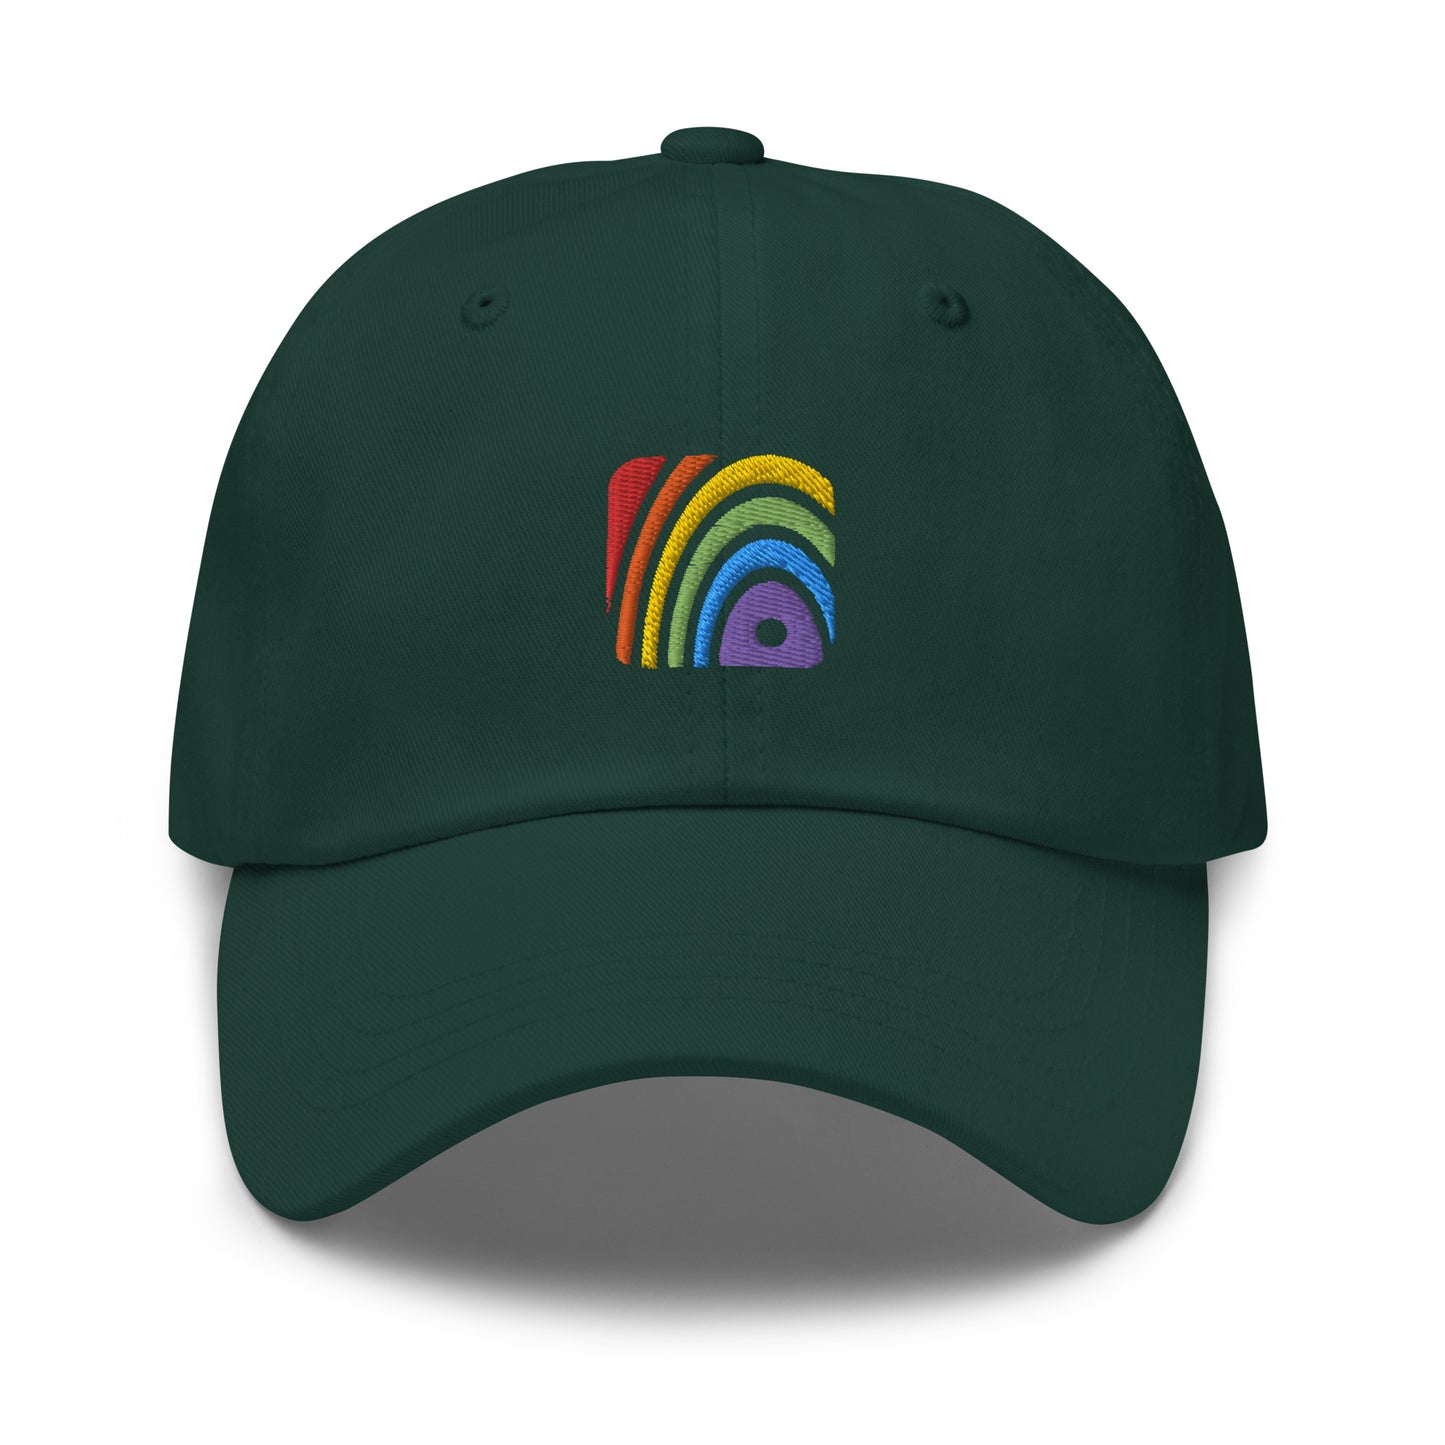 Spruce baseball hat featuring rainbow design embroidery with a low profile, adjustable strap.